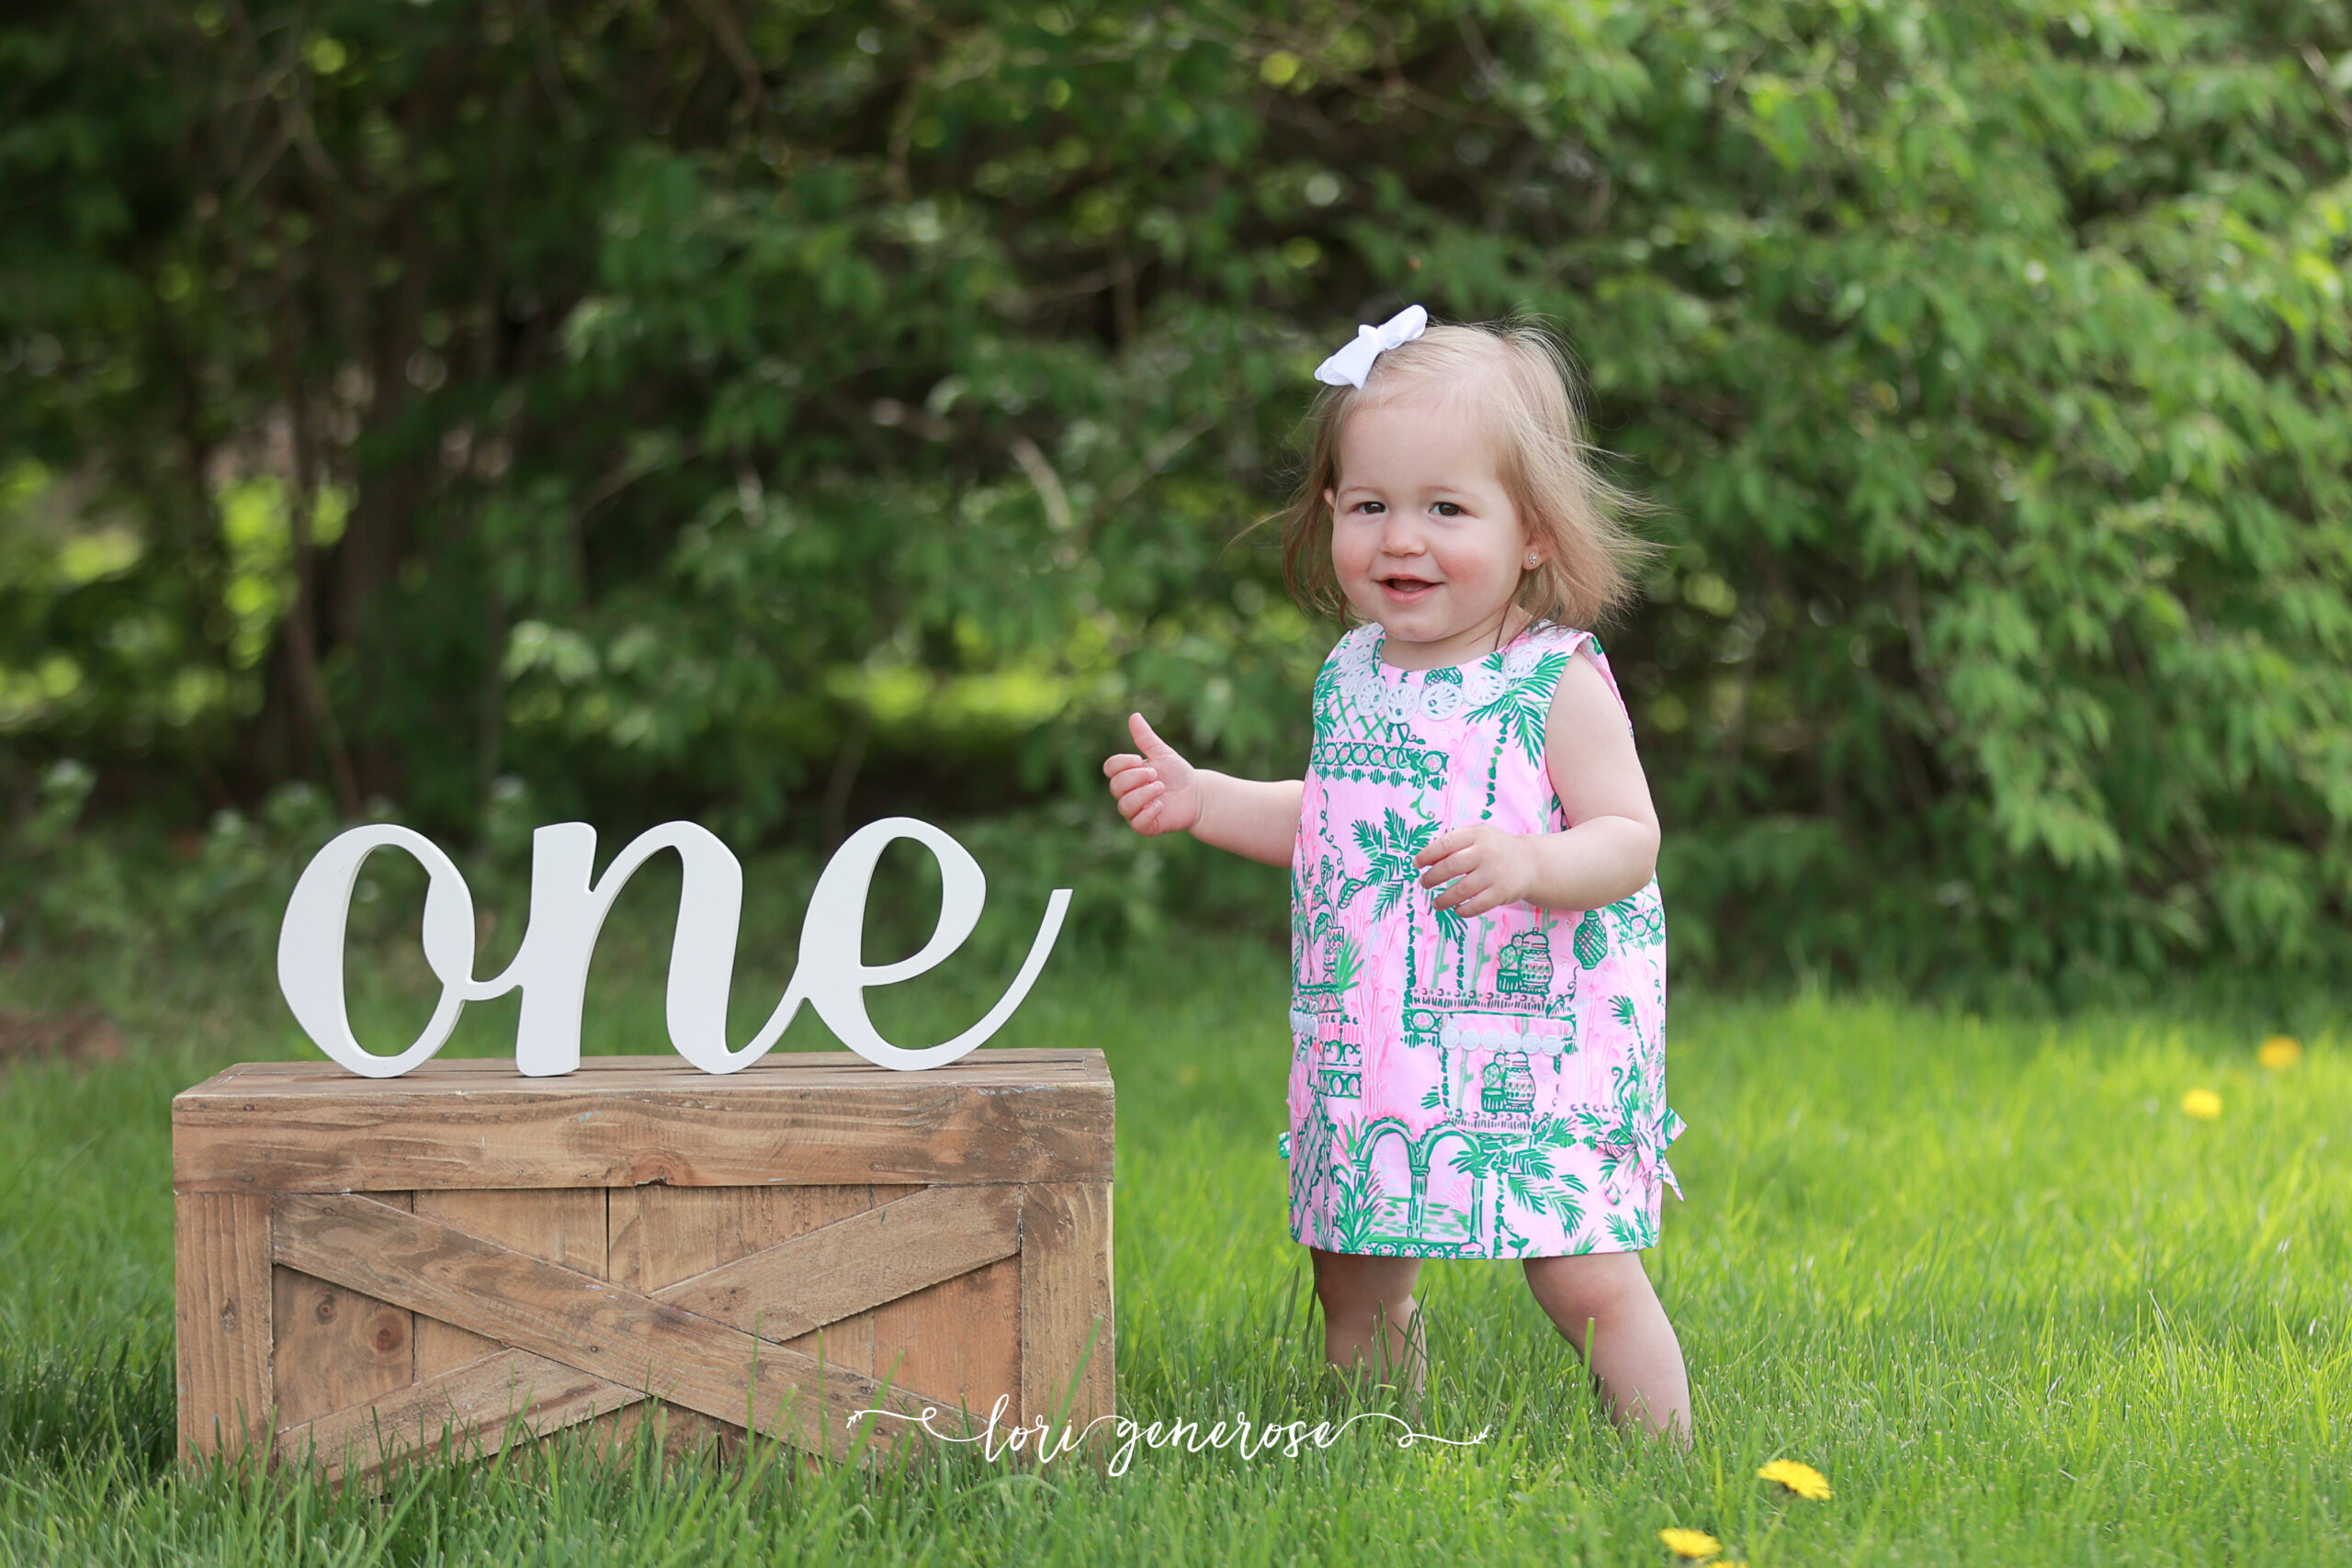 Lehigh Valley Photographer Lori Generose LG Photographer First Birthday Portraits Outside Best Year Ever Grow With Me Blog